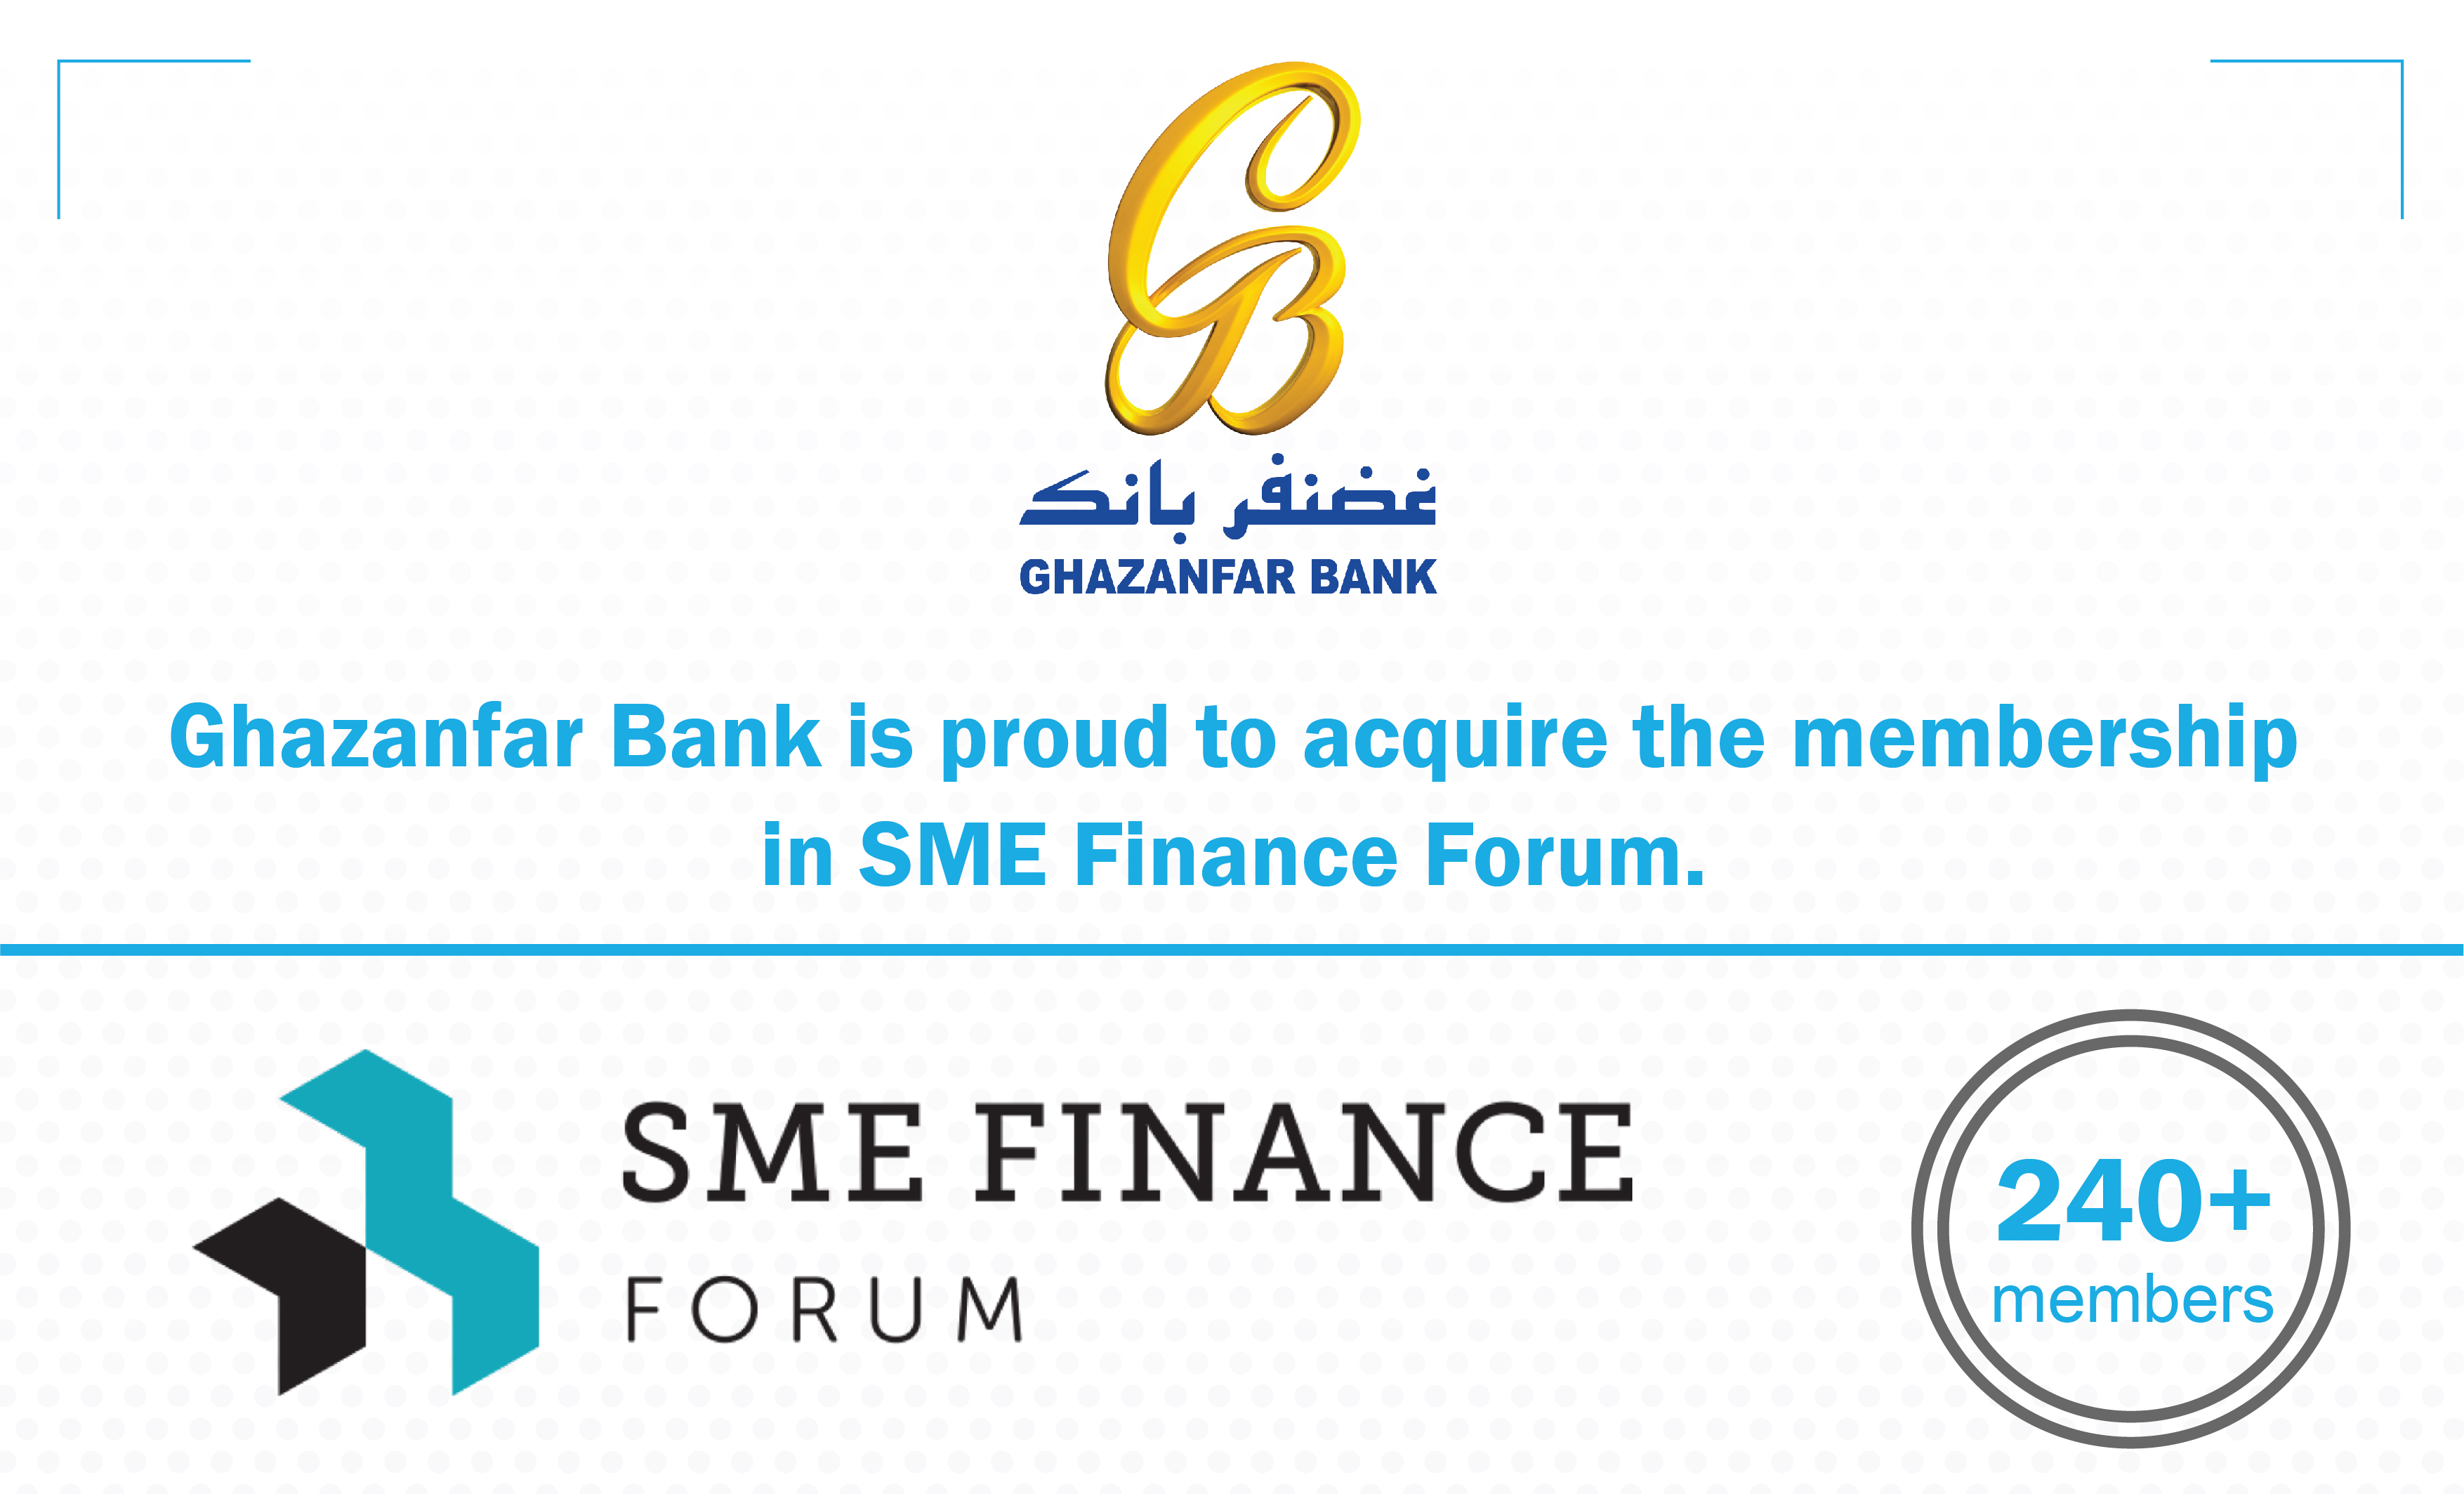 Ghazanfar Bank is proud to acquire the membership in SME Finance Forum